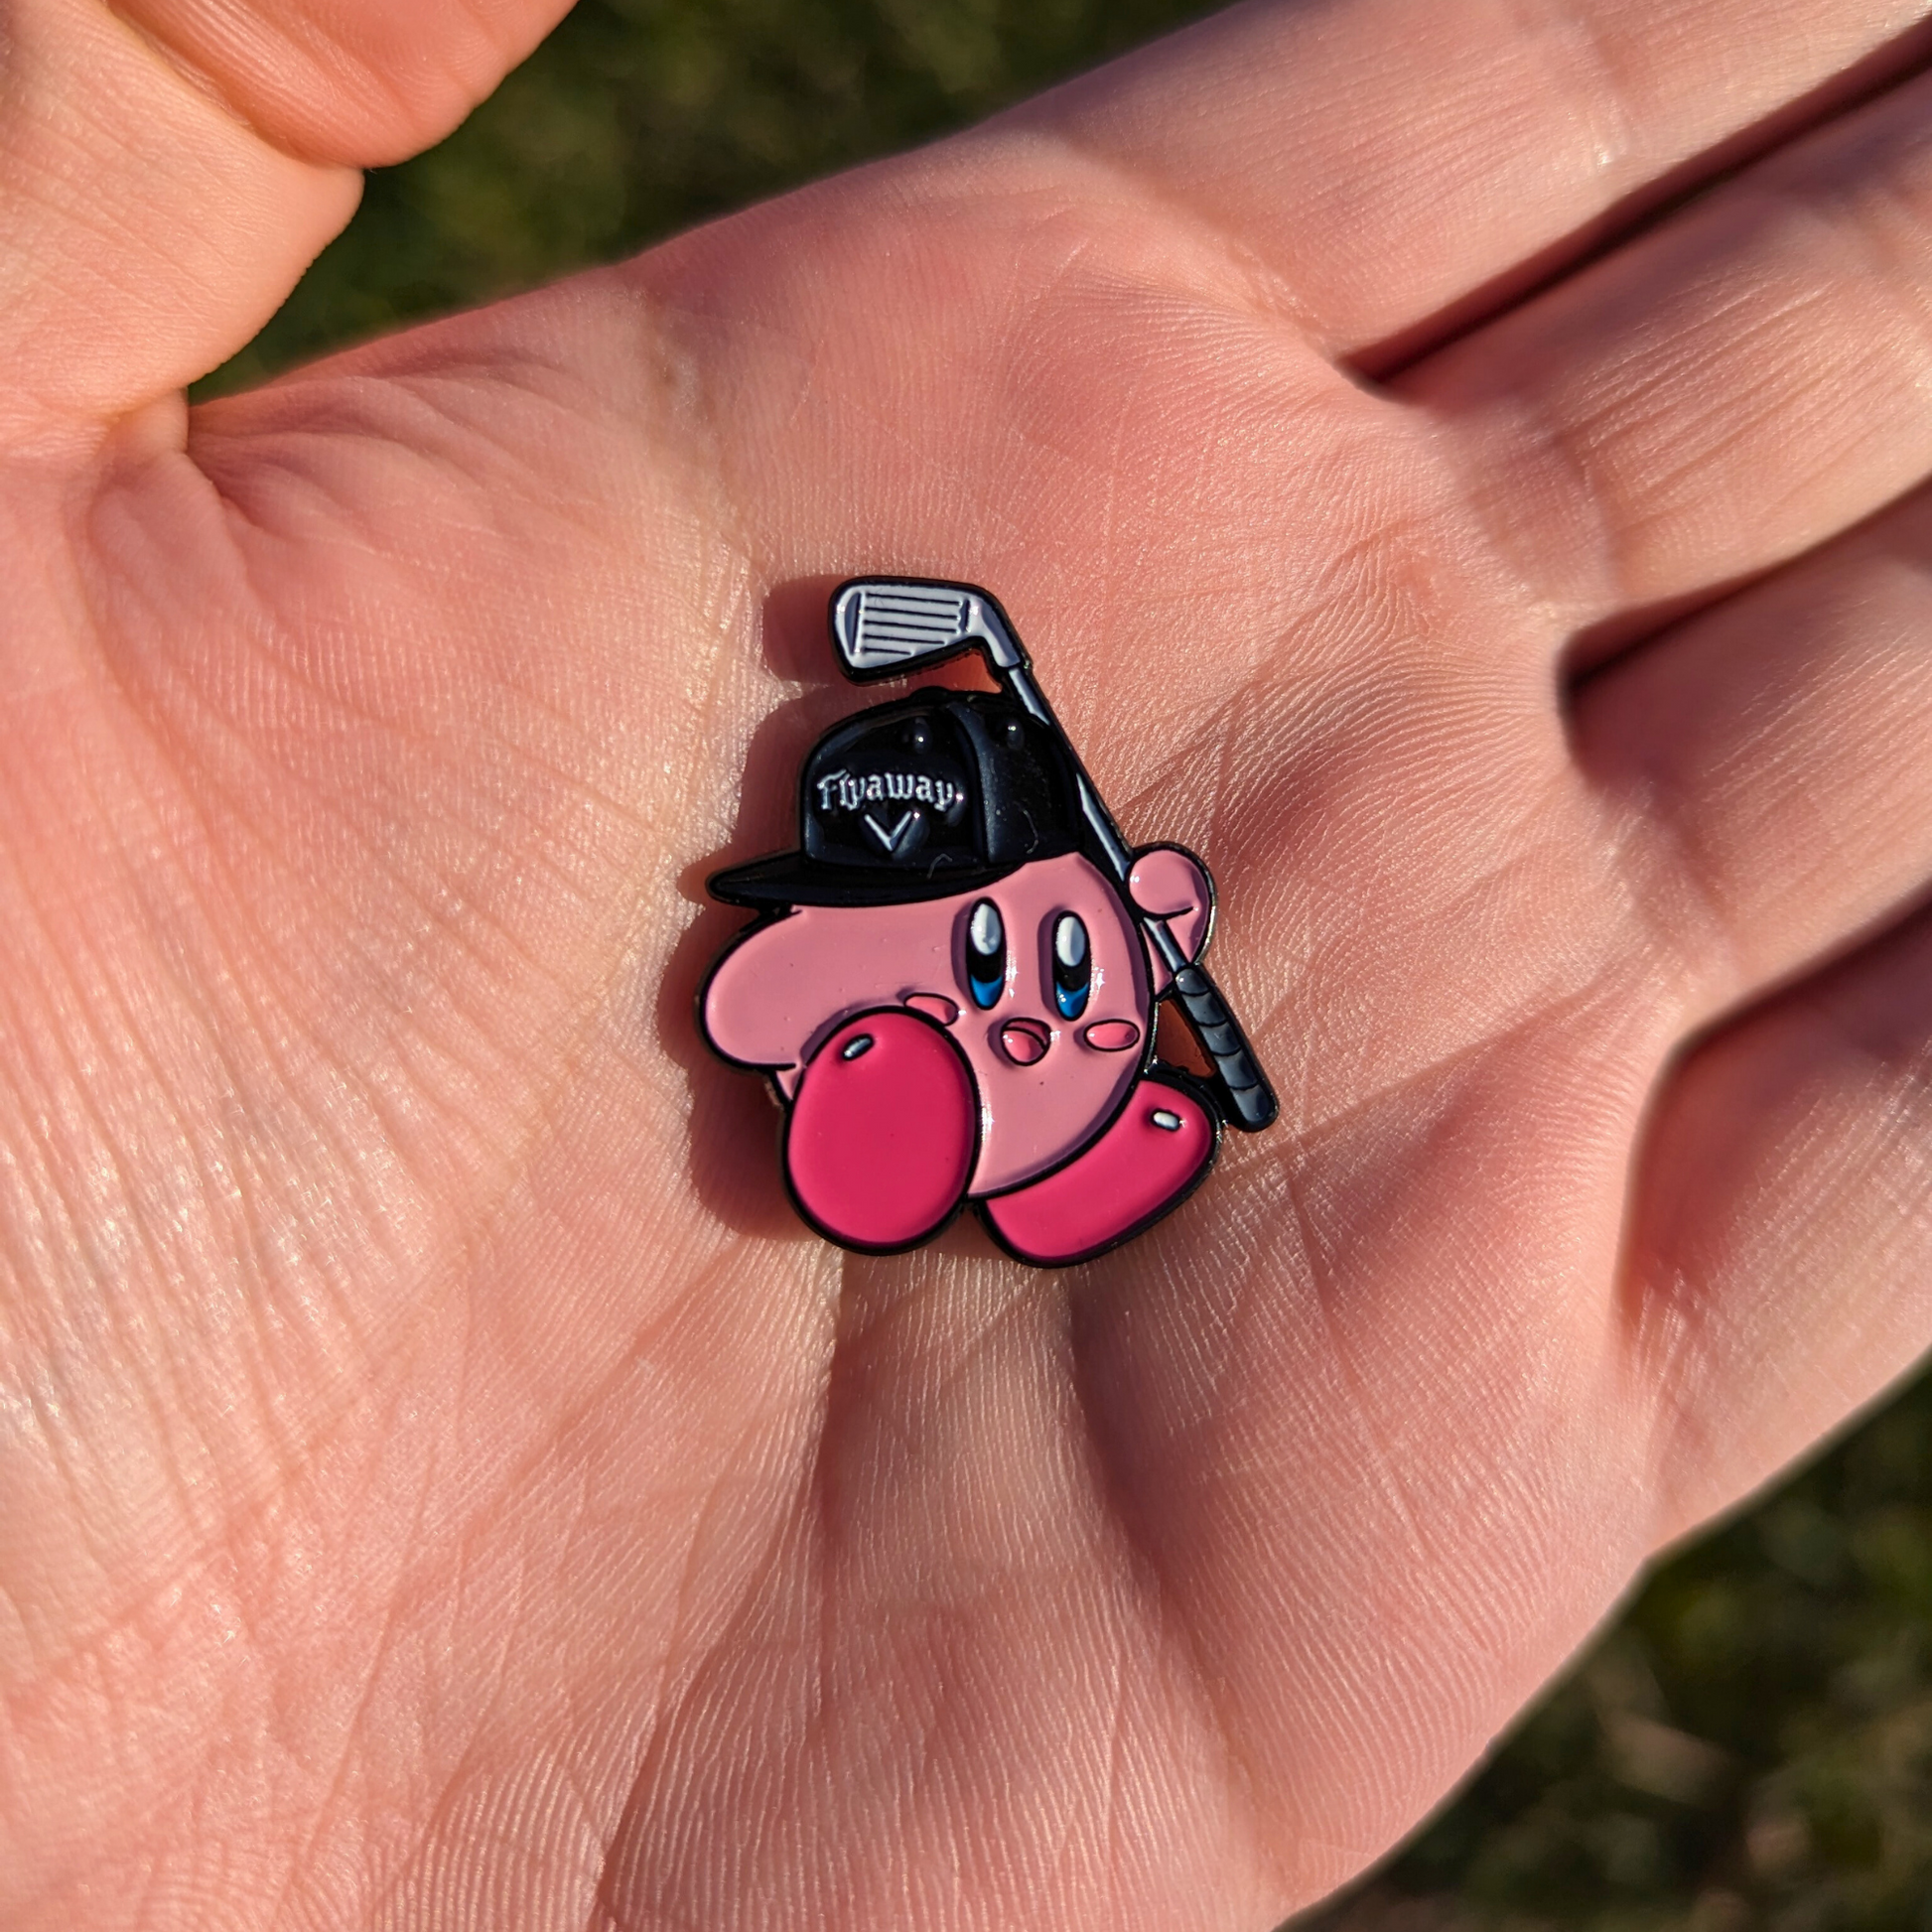 pink kirby video game character wearing flyaway hat and holding golf club golf ball marker in hand